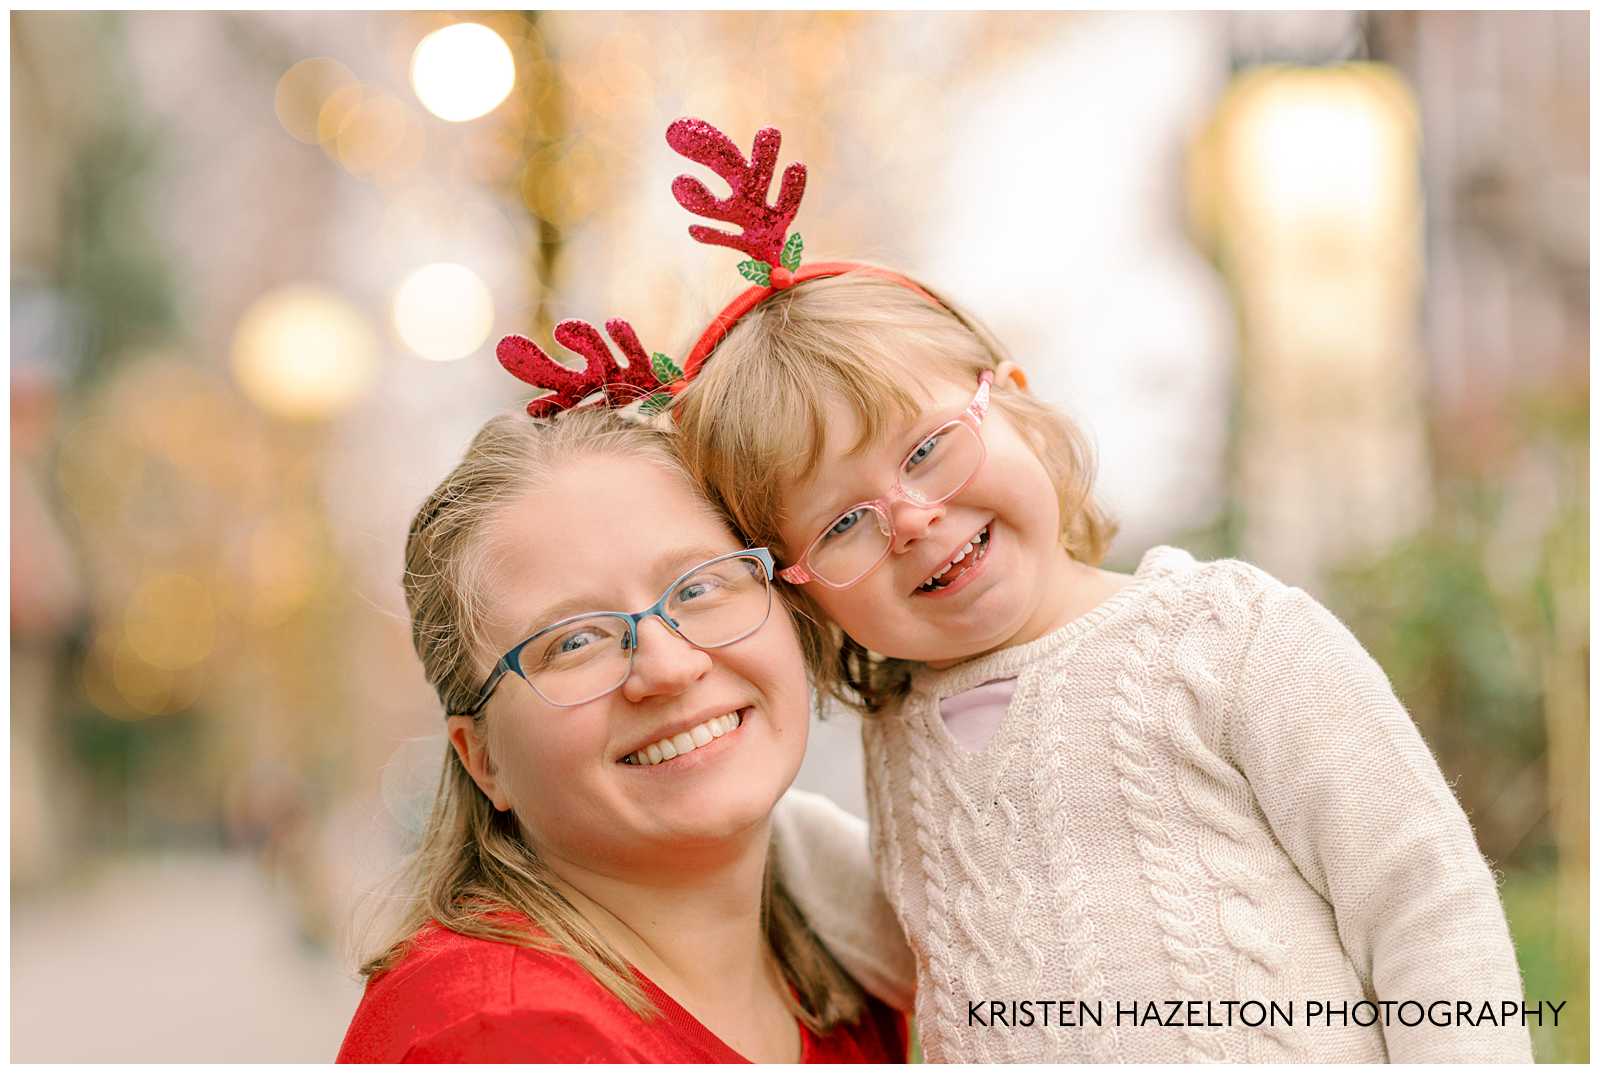 Closeup photo of a woman in a red dress with blue glasses and her toddler daughter in a white sweater dress and red reindeer antler headband.